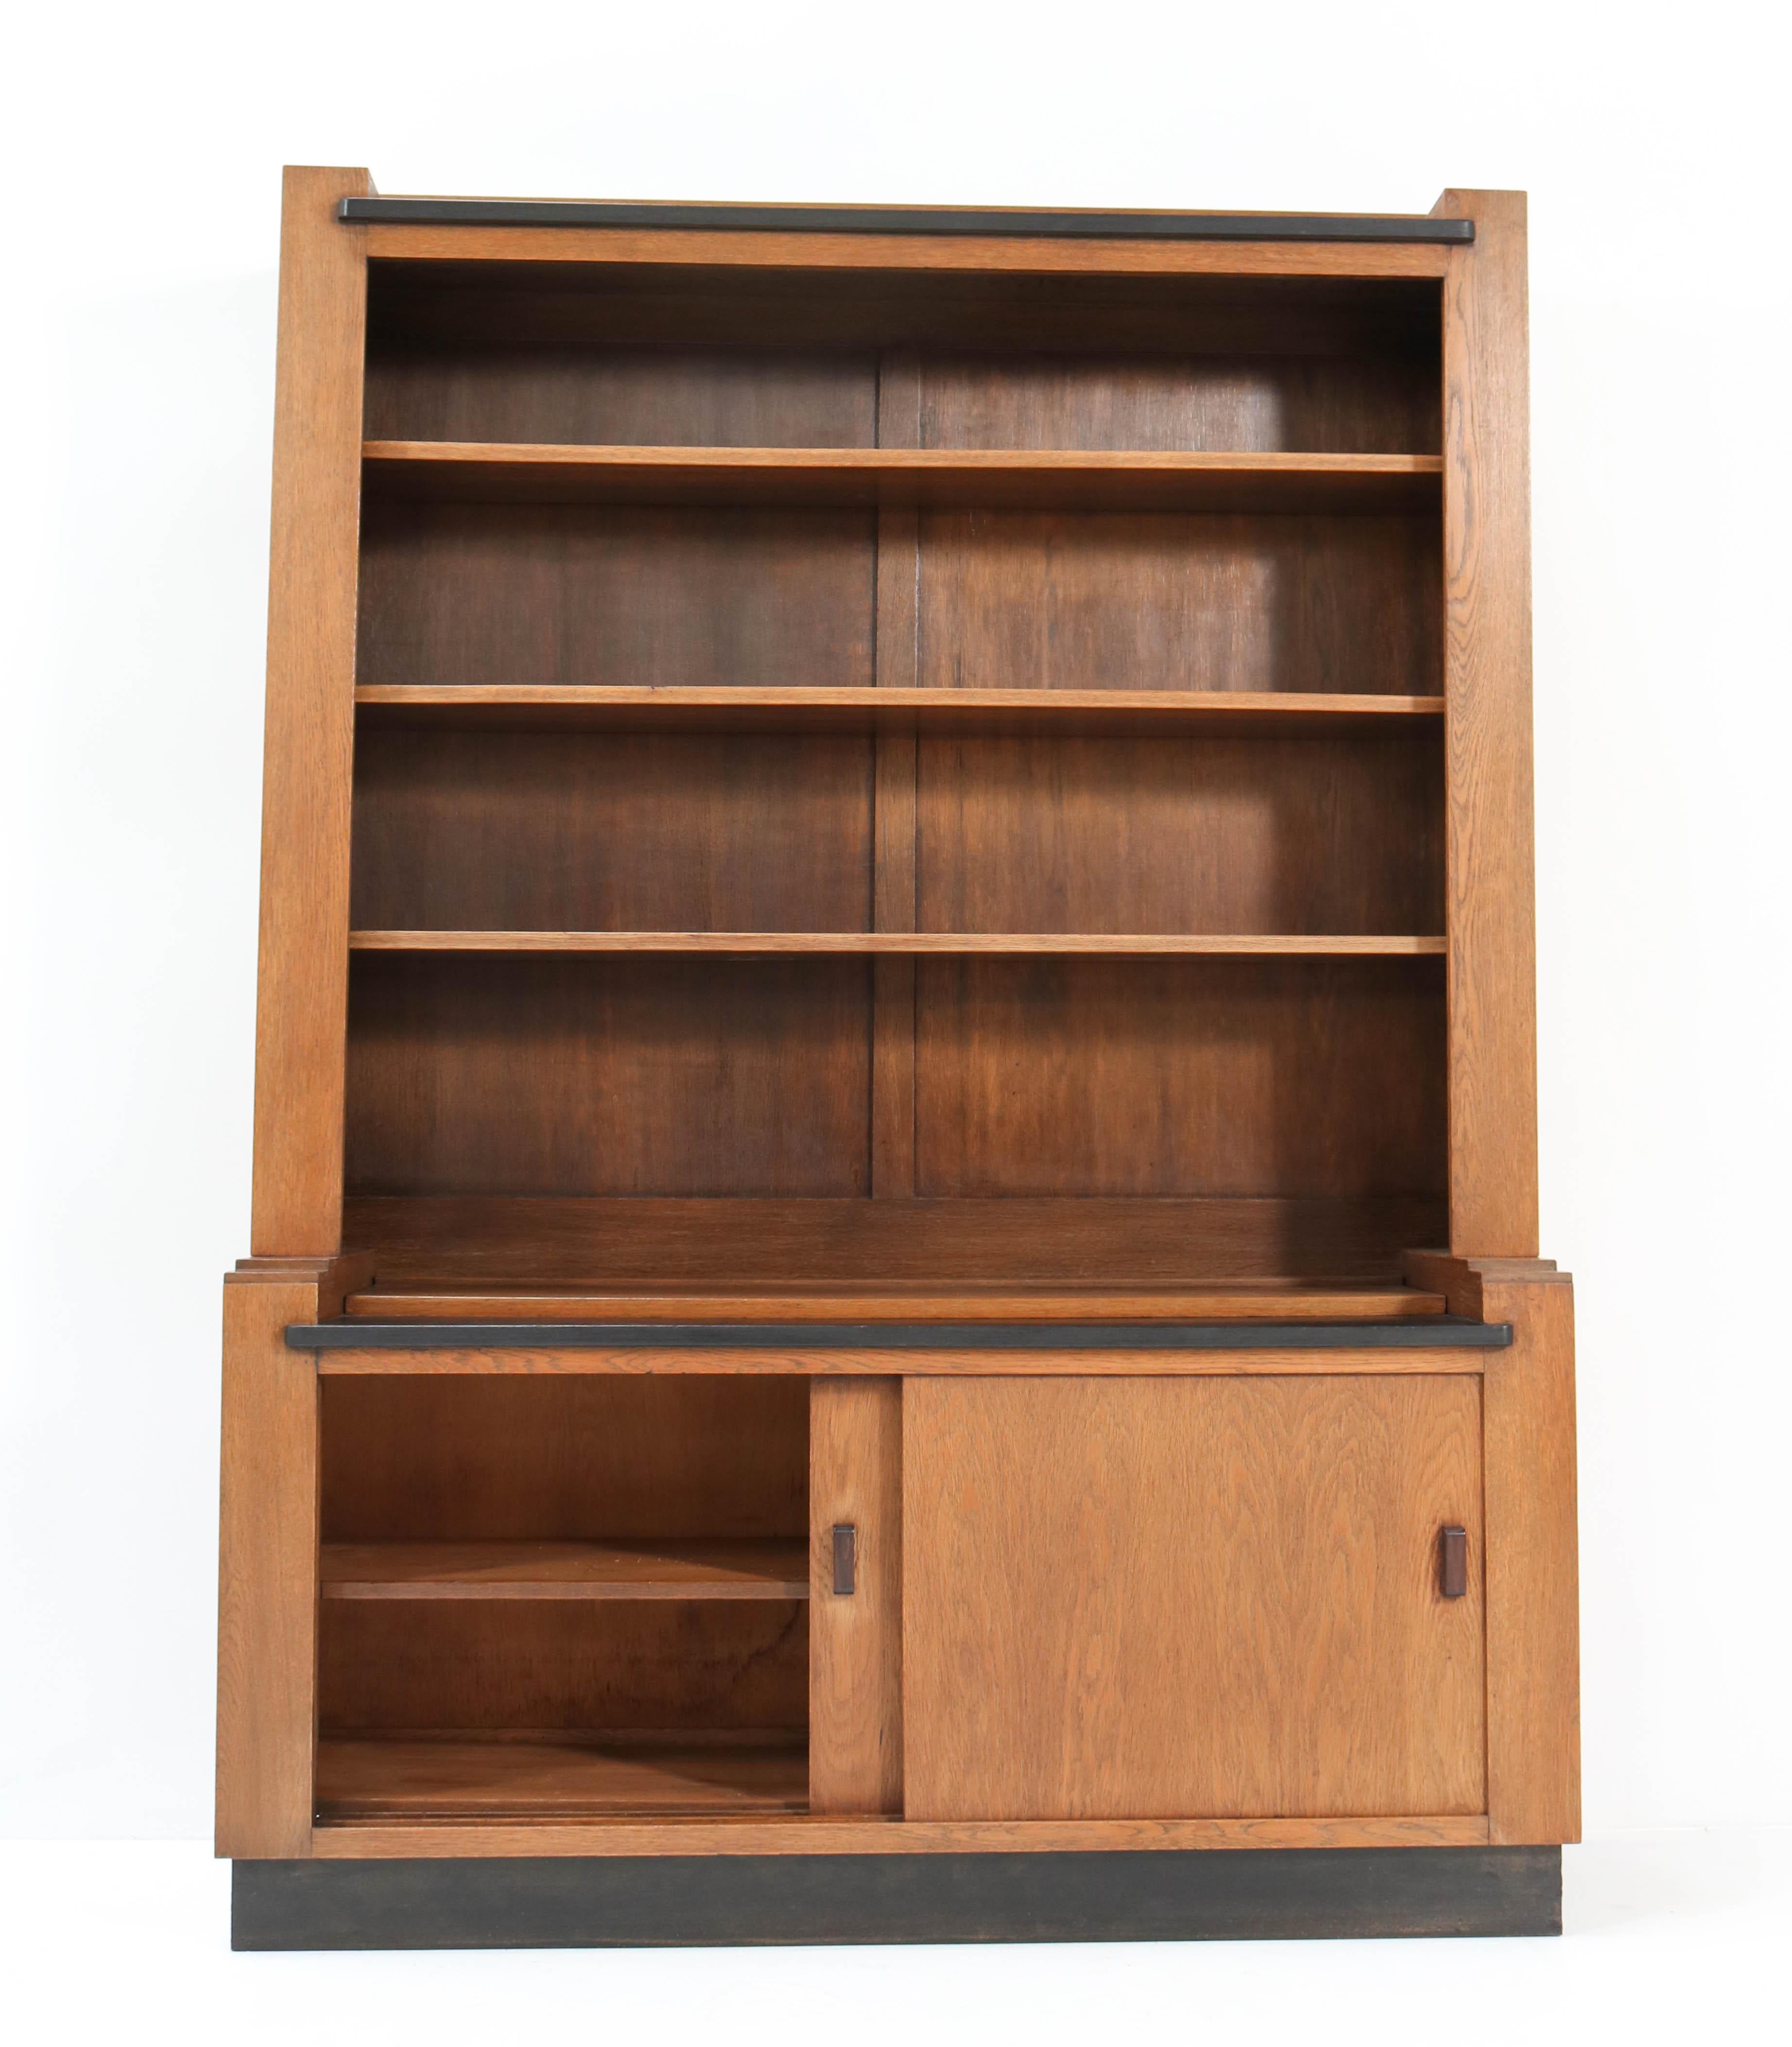 Lacquered Oak Art Deco Haagse School Bookcase by Cor Alons for L.O.V. Oosterbeek, 1920s